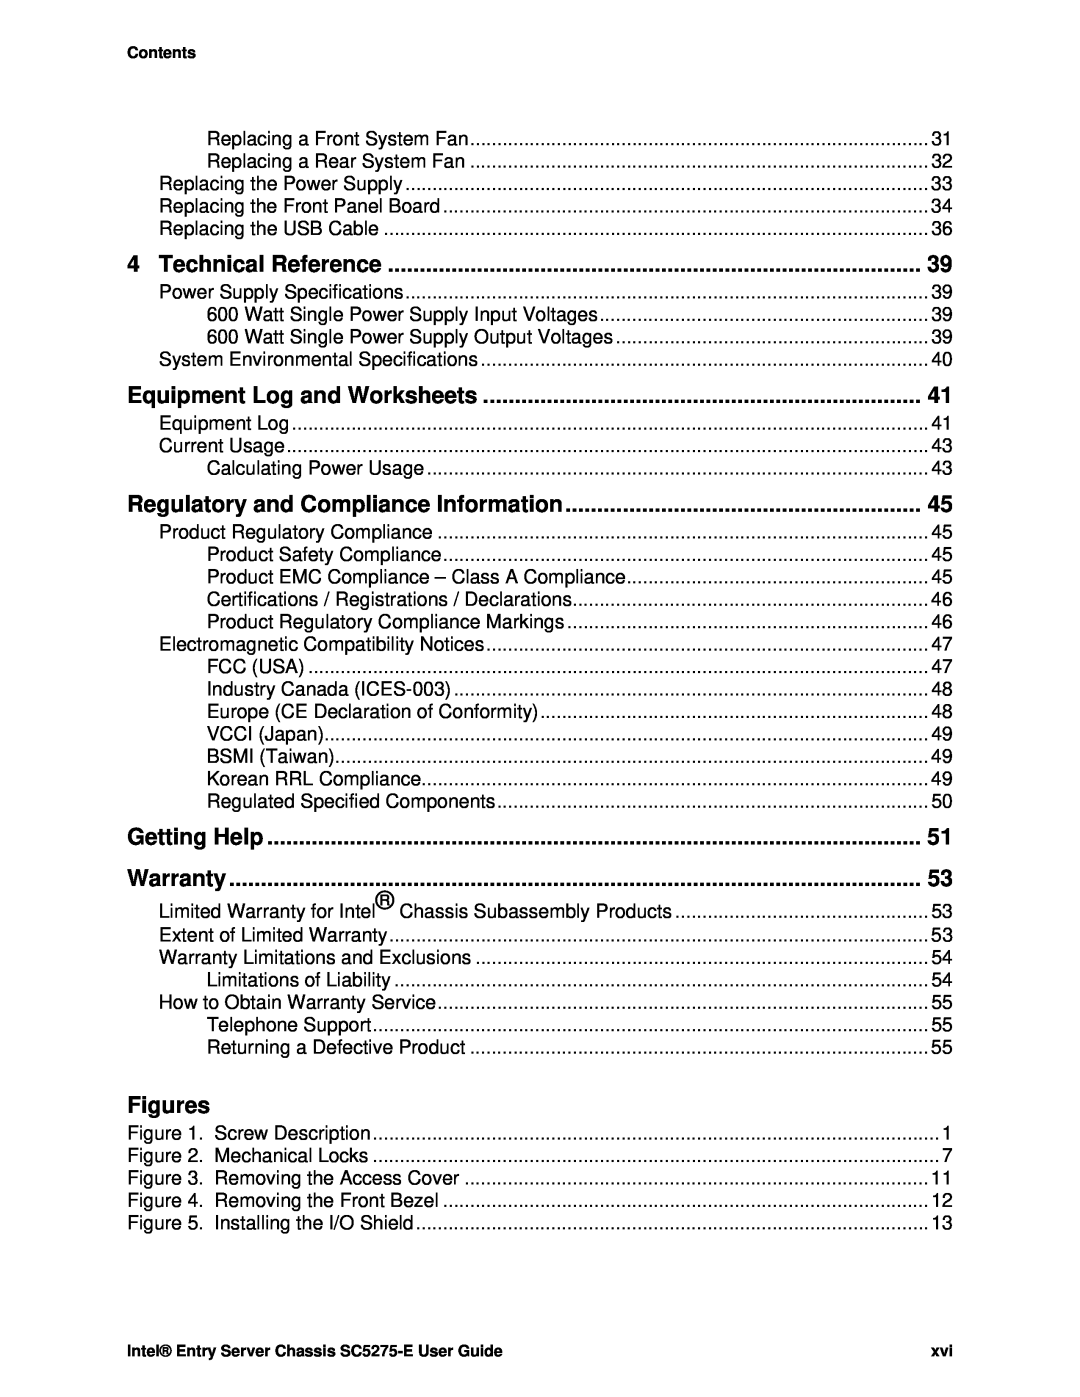 Intel SC5275-E Technical Reference, Equipment Log and Worksheets, Regulatory and Compliance Information, Figures, Warranty 